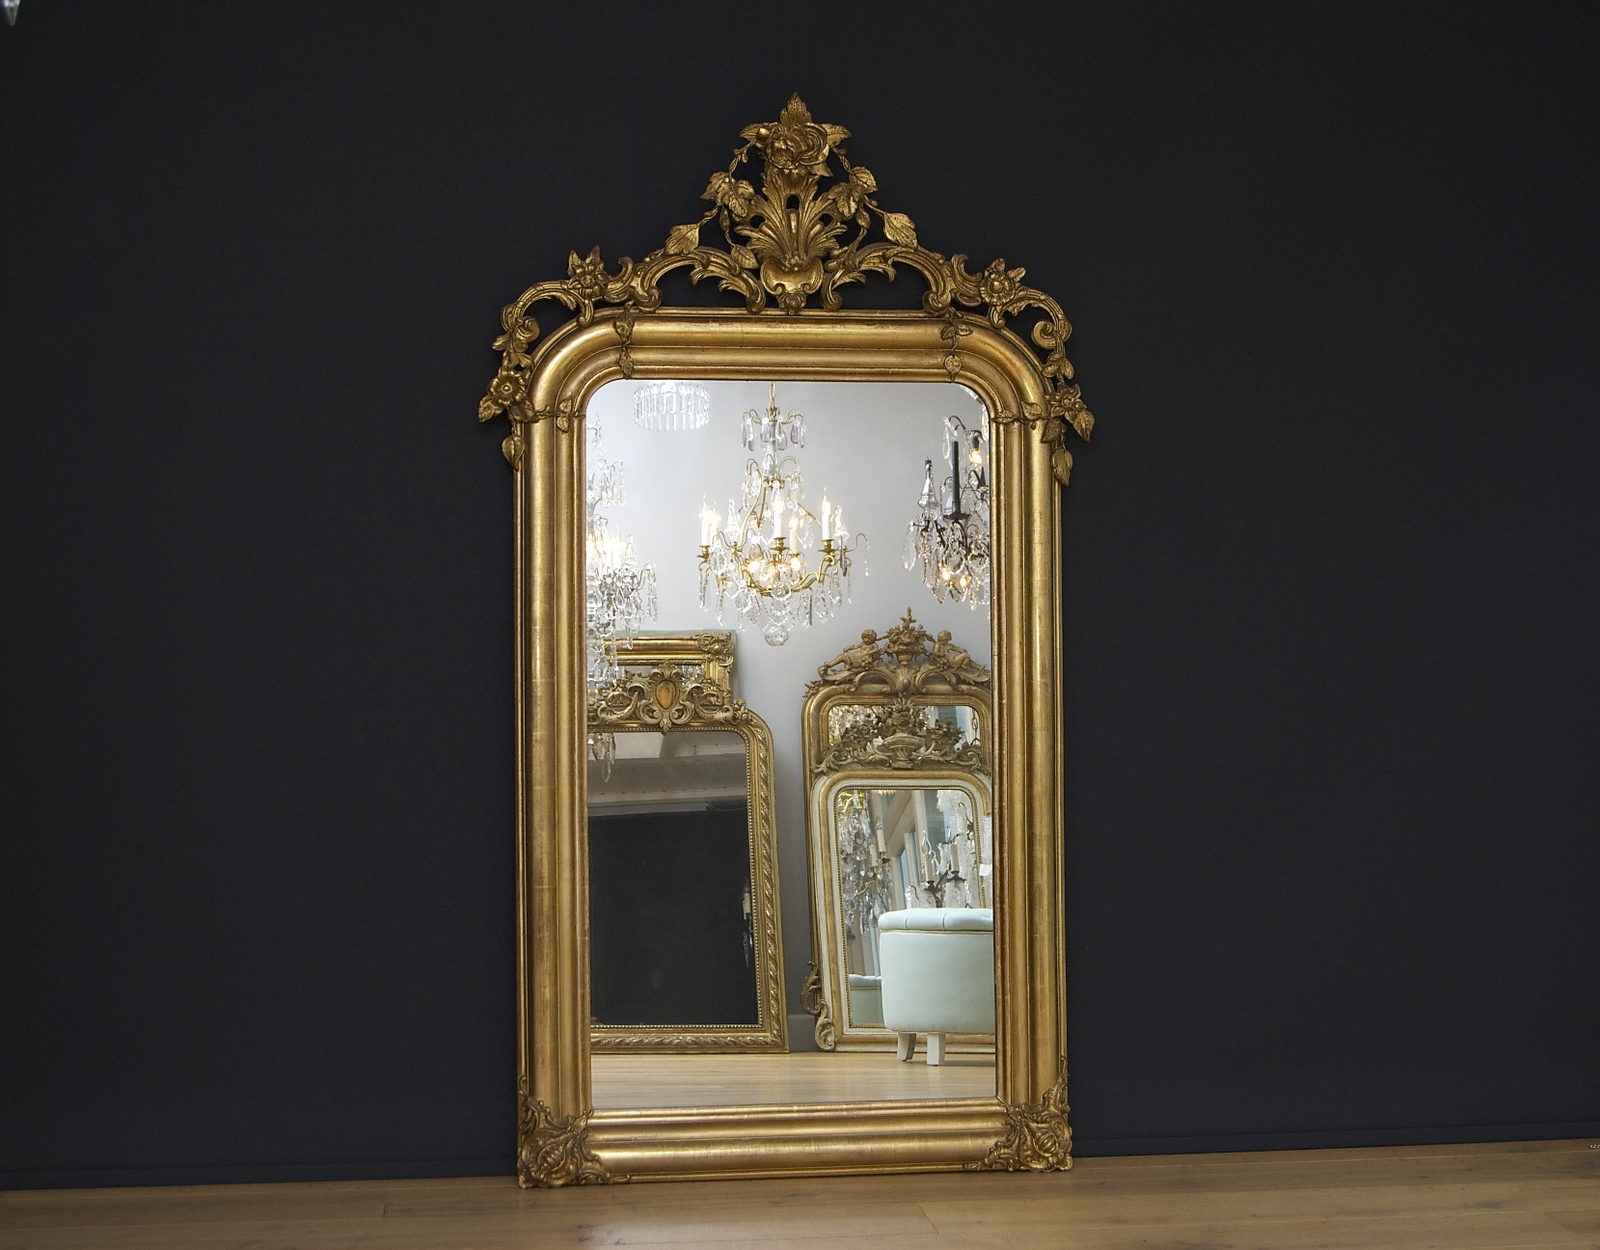 19th century French gilded mirror with a magnificent crown